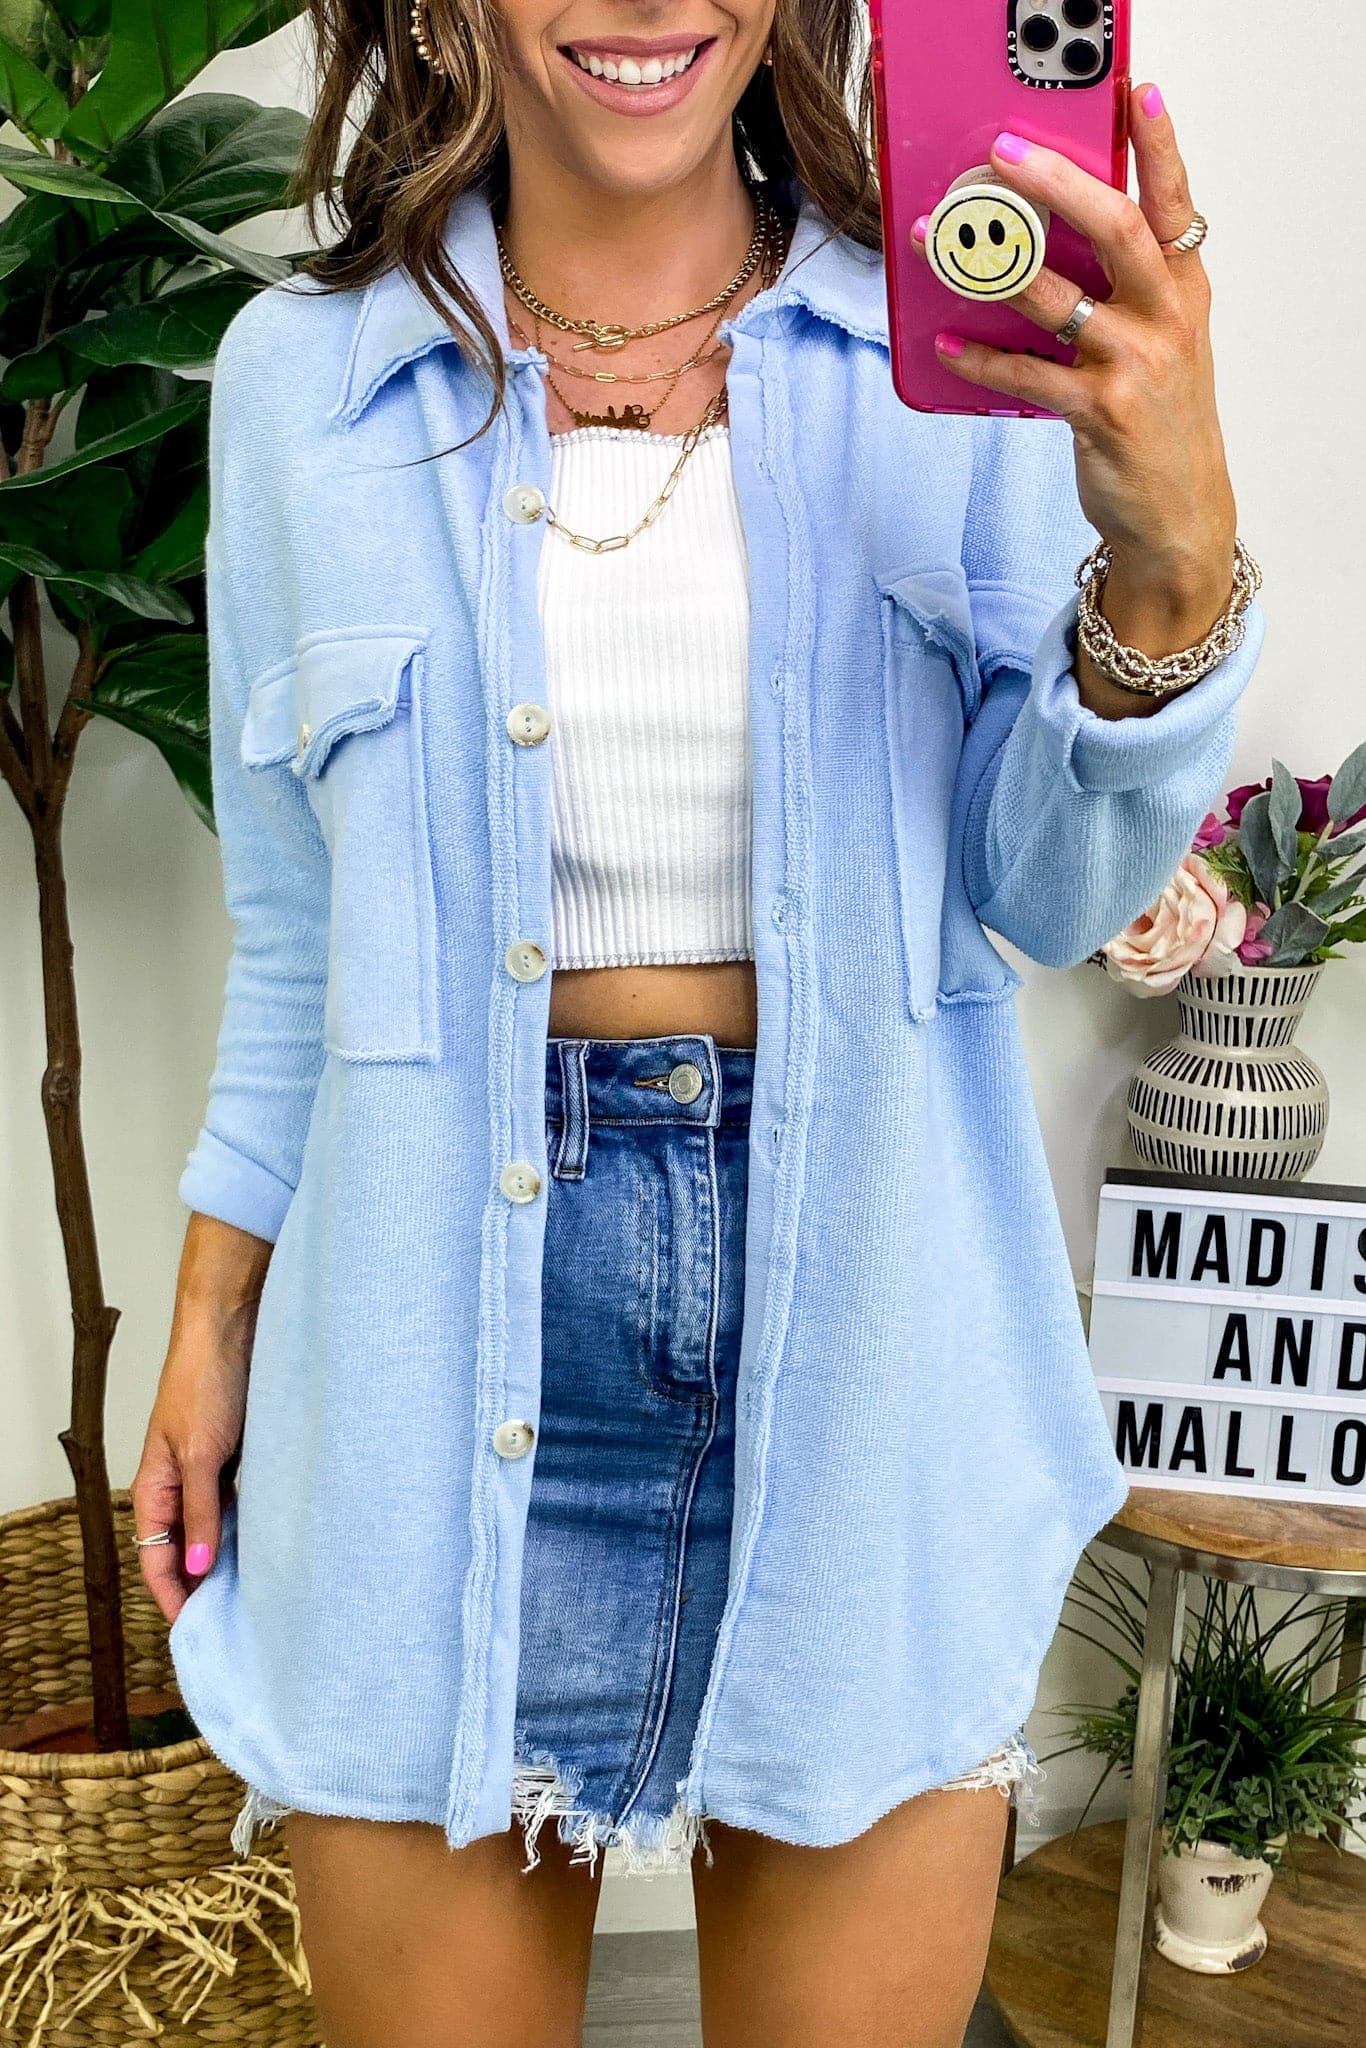  Staple Style Raw Edge Relaxed Fit Shacket - FINAL SALE - Madison and Mallory